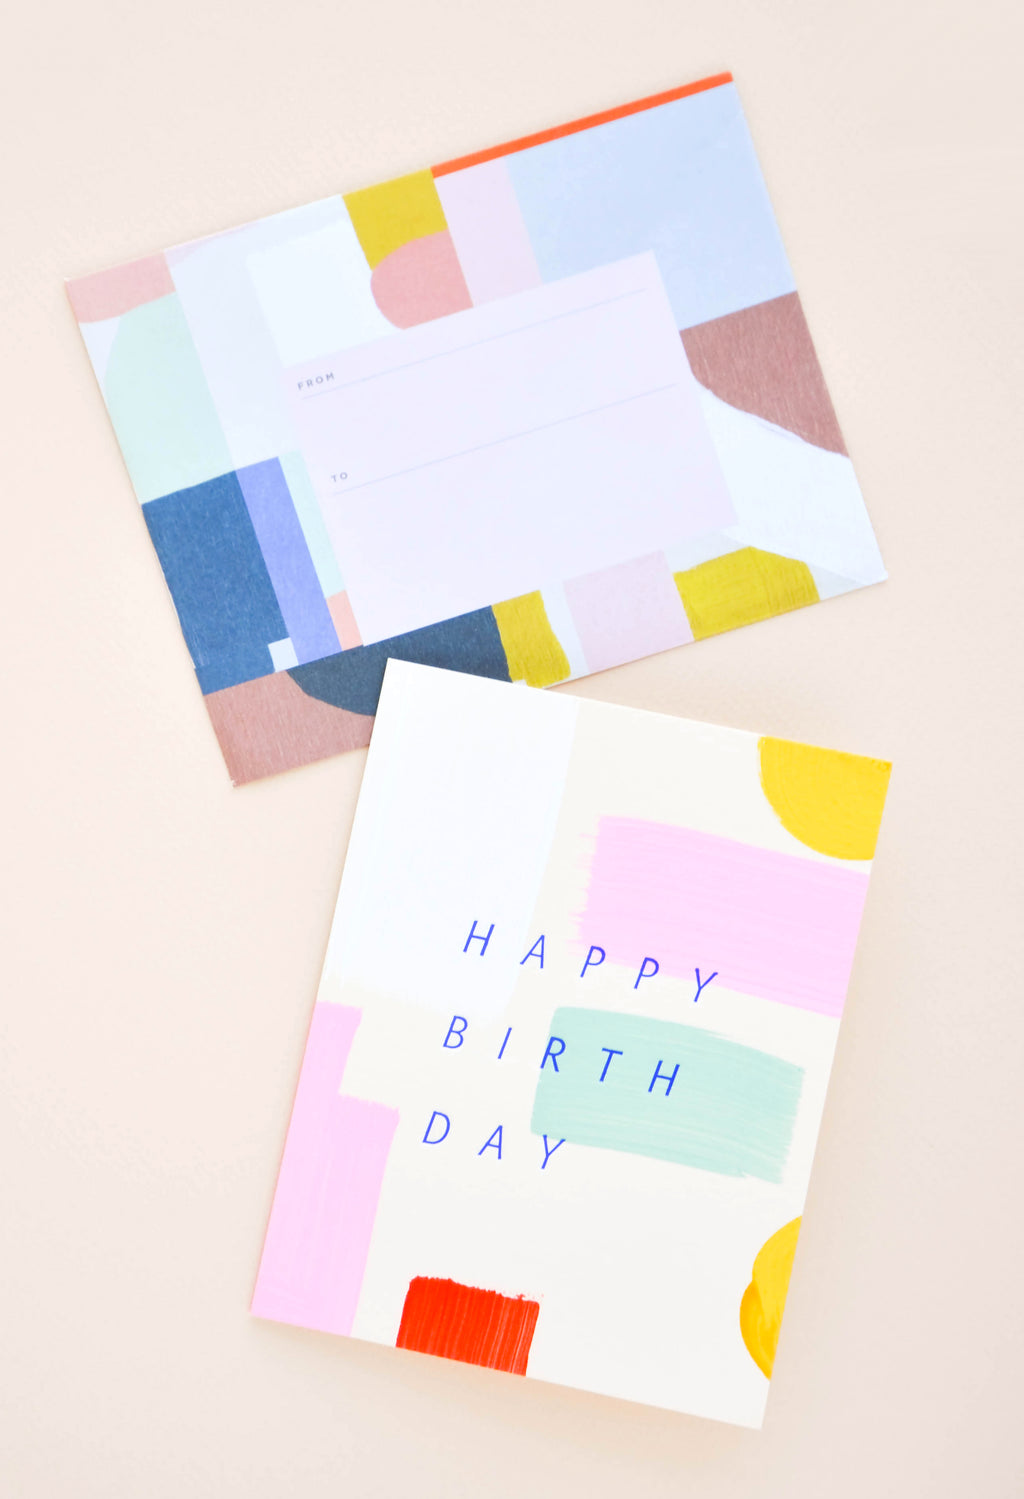 2: Greeting card with hand-painted colorful brushstrokes and "Happy Birthday" printed in cobalt blue